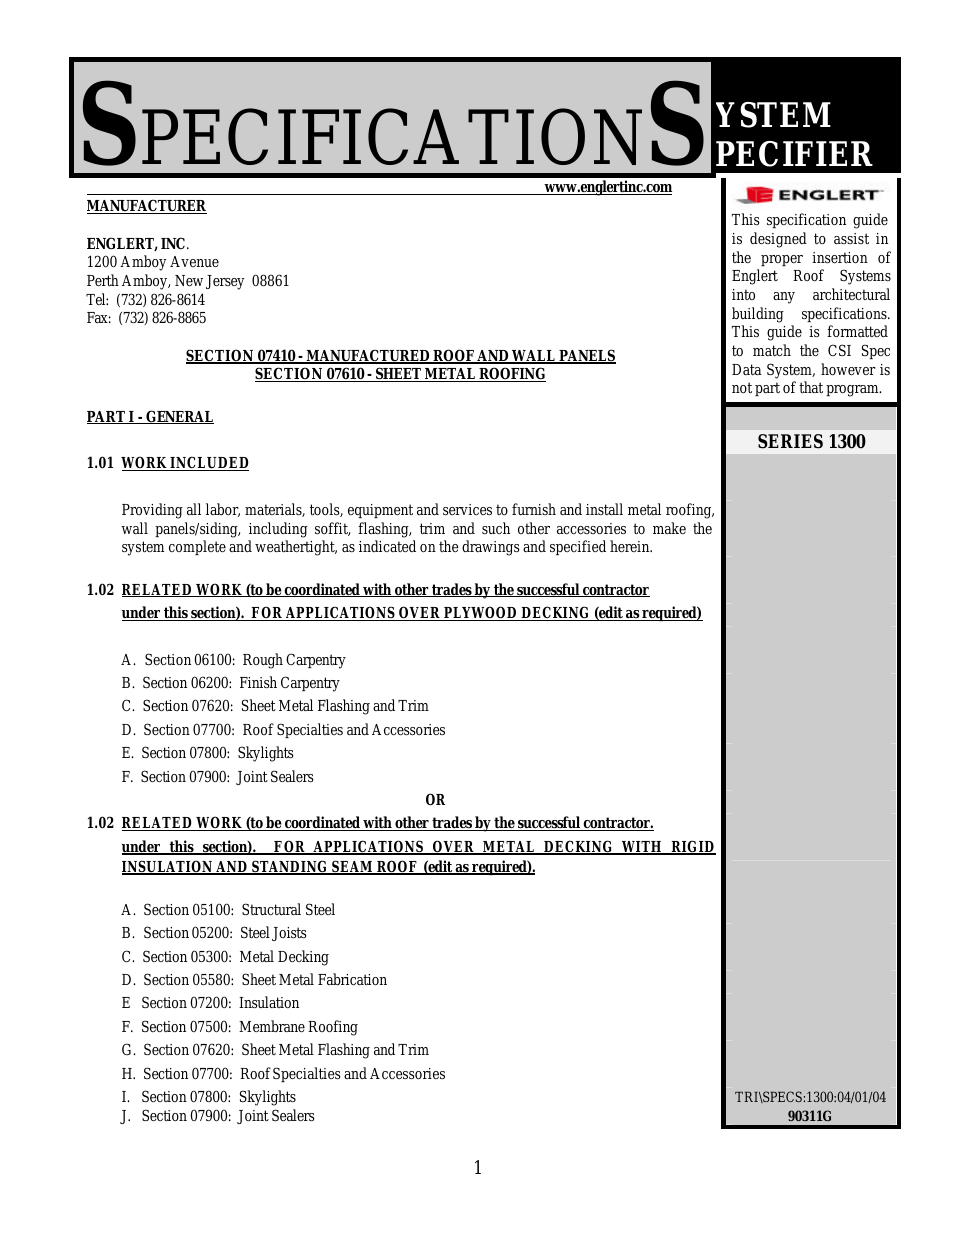 A1300 Specifier Sheets